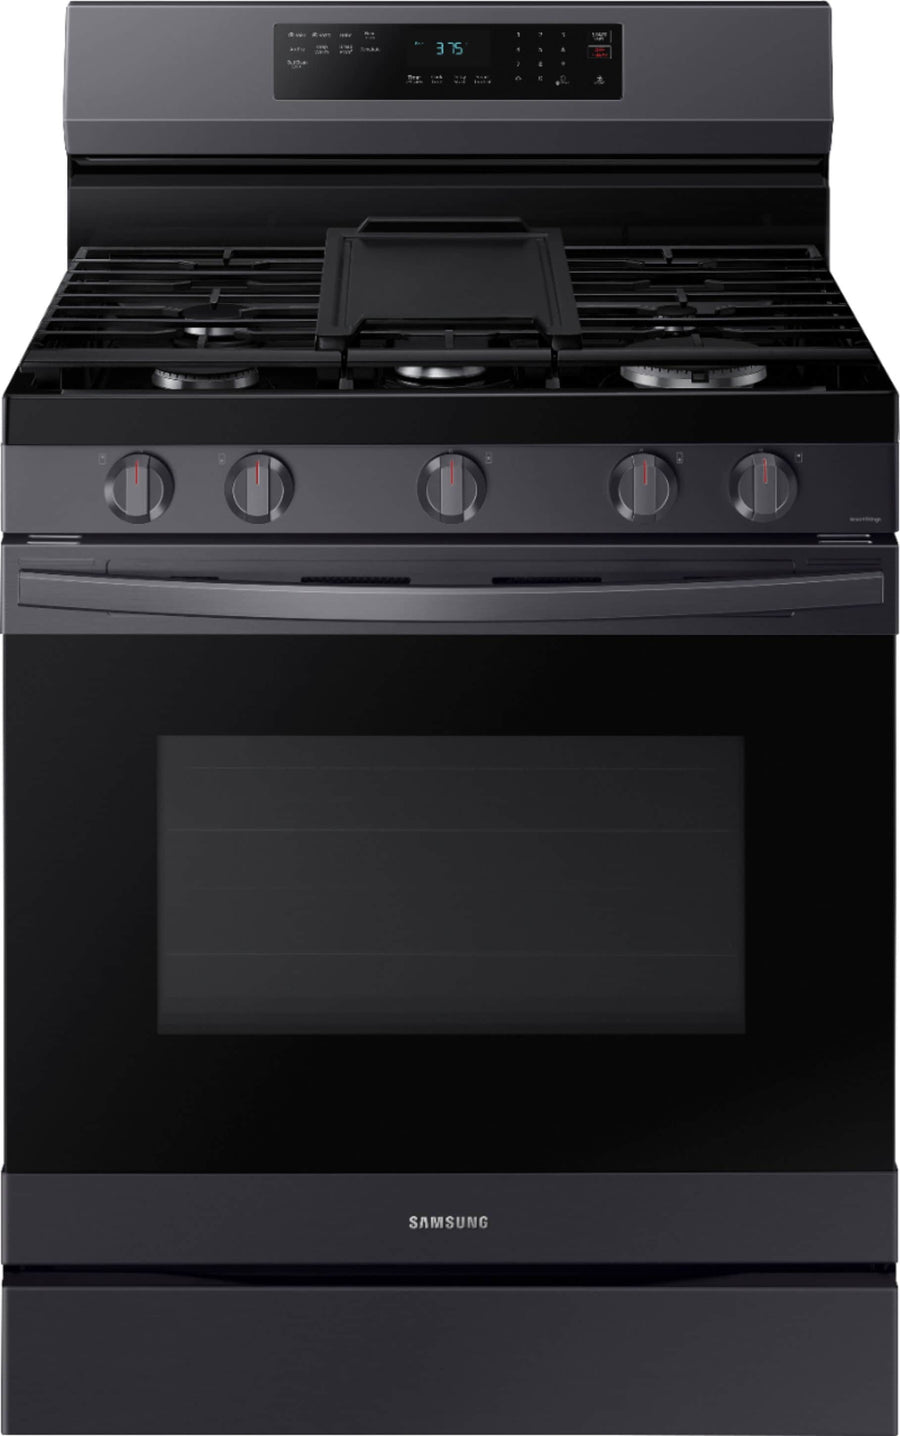 Samsung - 6.0 cu. ft. Freestanding Gas Range with WiFi, No-Preheat Air Fry & Convection - Black stainless steel_0